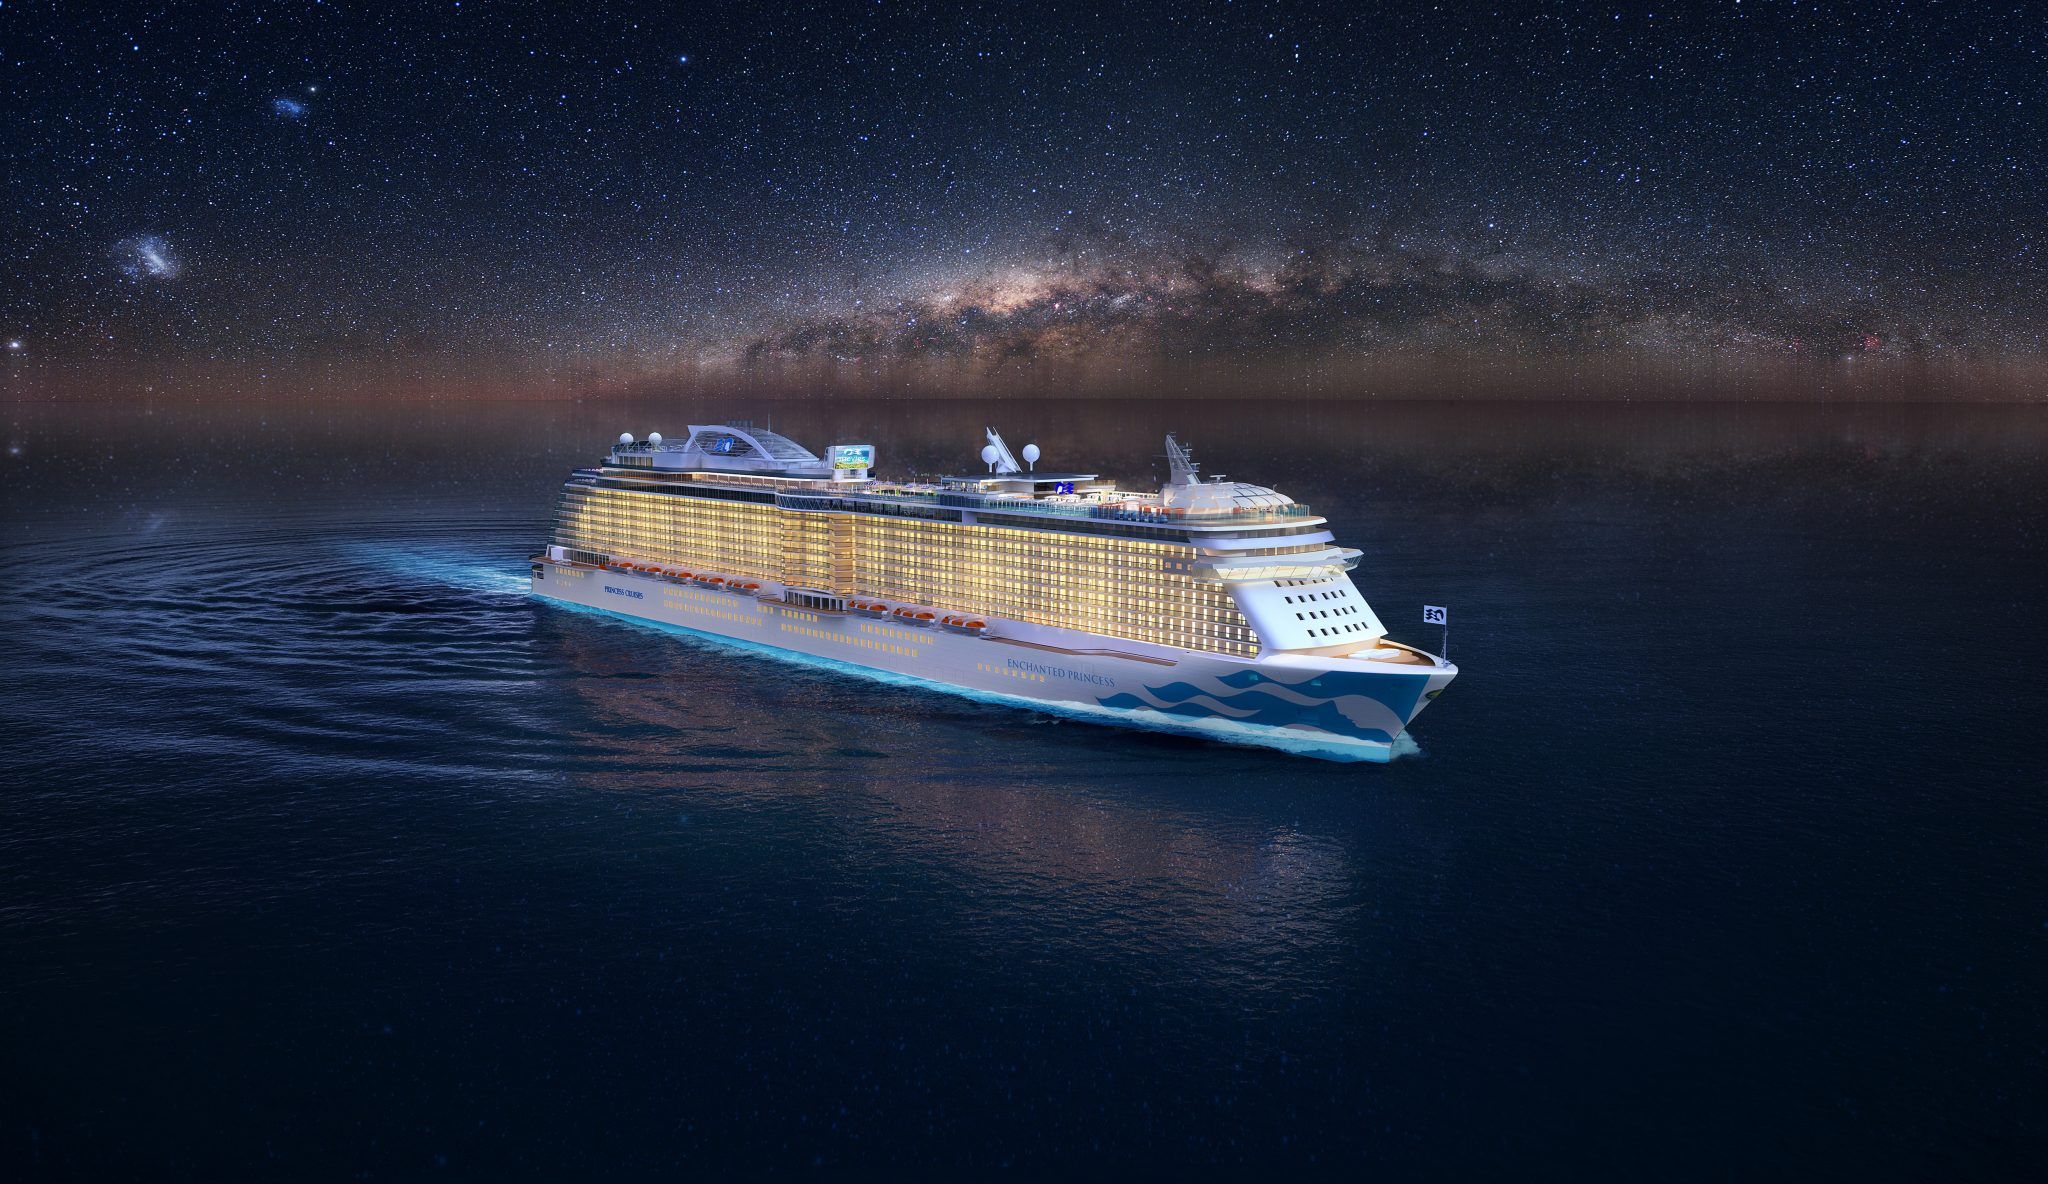 new cruise ships for 2020